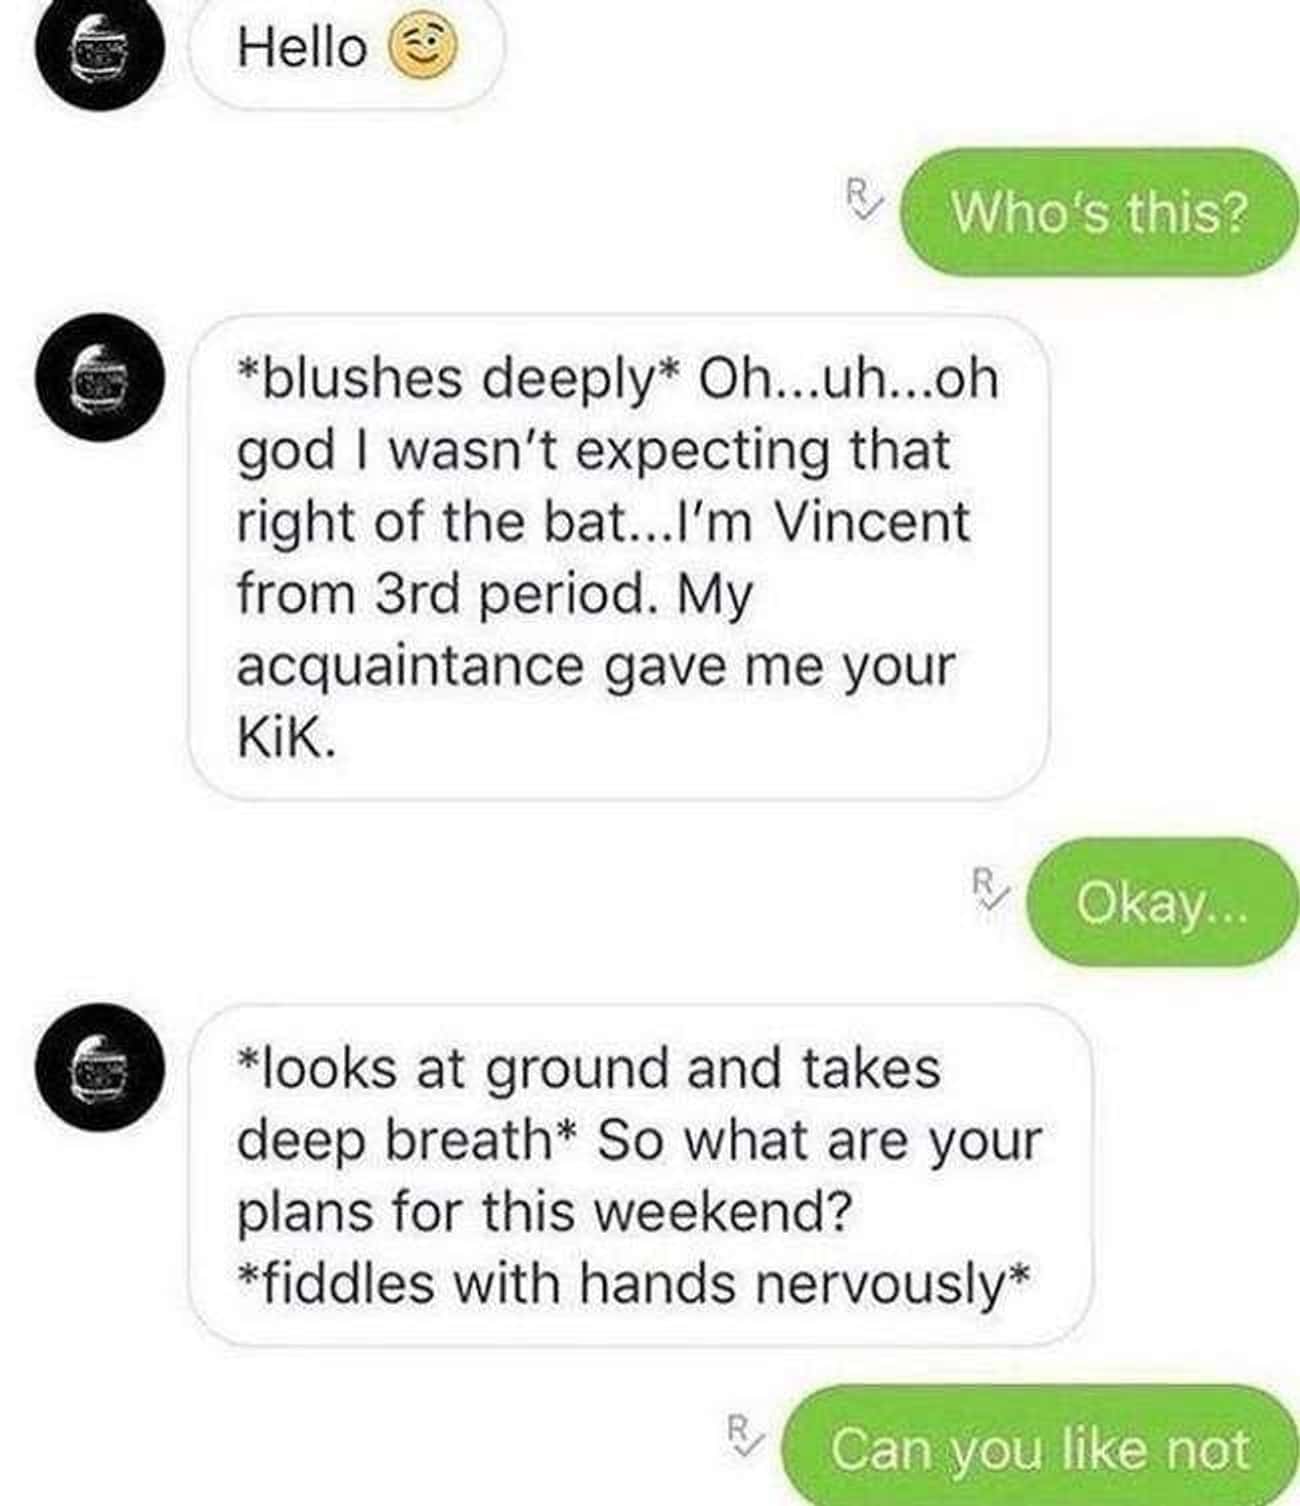 cringe posts - Hello Who's this? blushes deeply Oh...uh...oh god I wasn't expecting that right of the bat...I'm Vincent from 3rd period. My acquaintance gave me your KiK. Okay... looks at ground and takes deep breath So what are your plans for this weeken